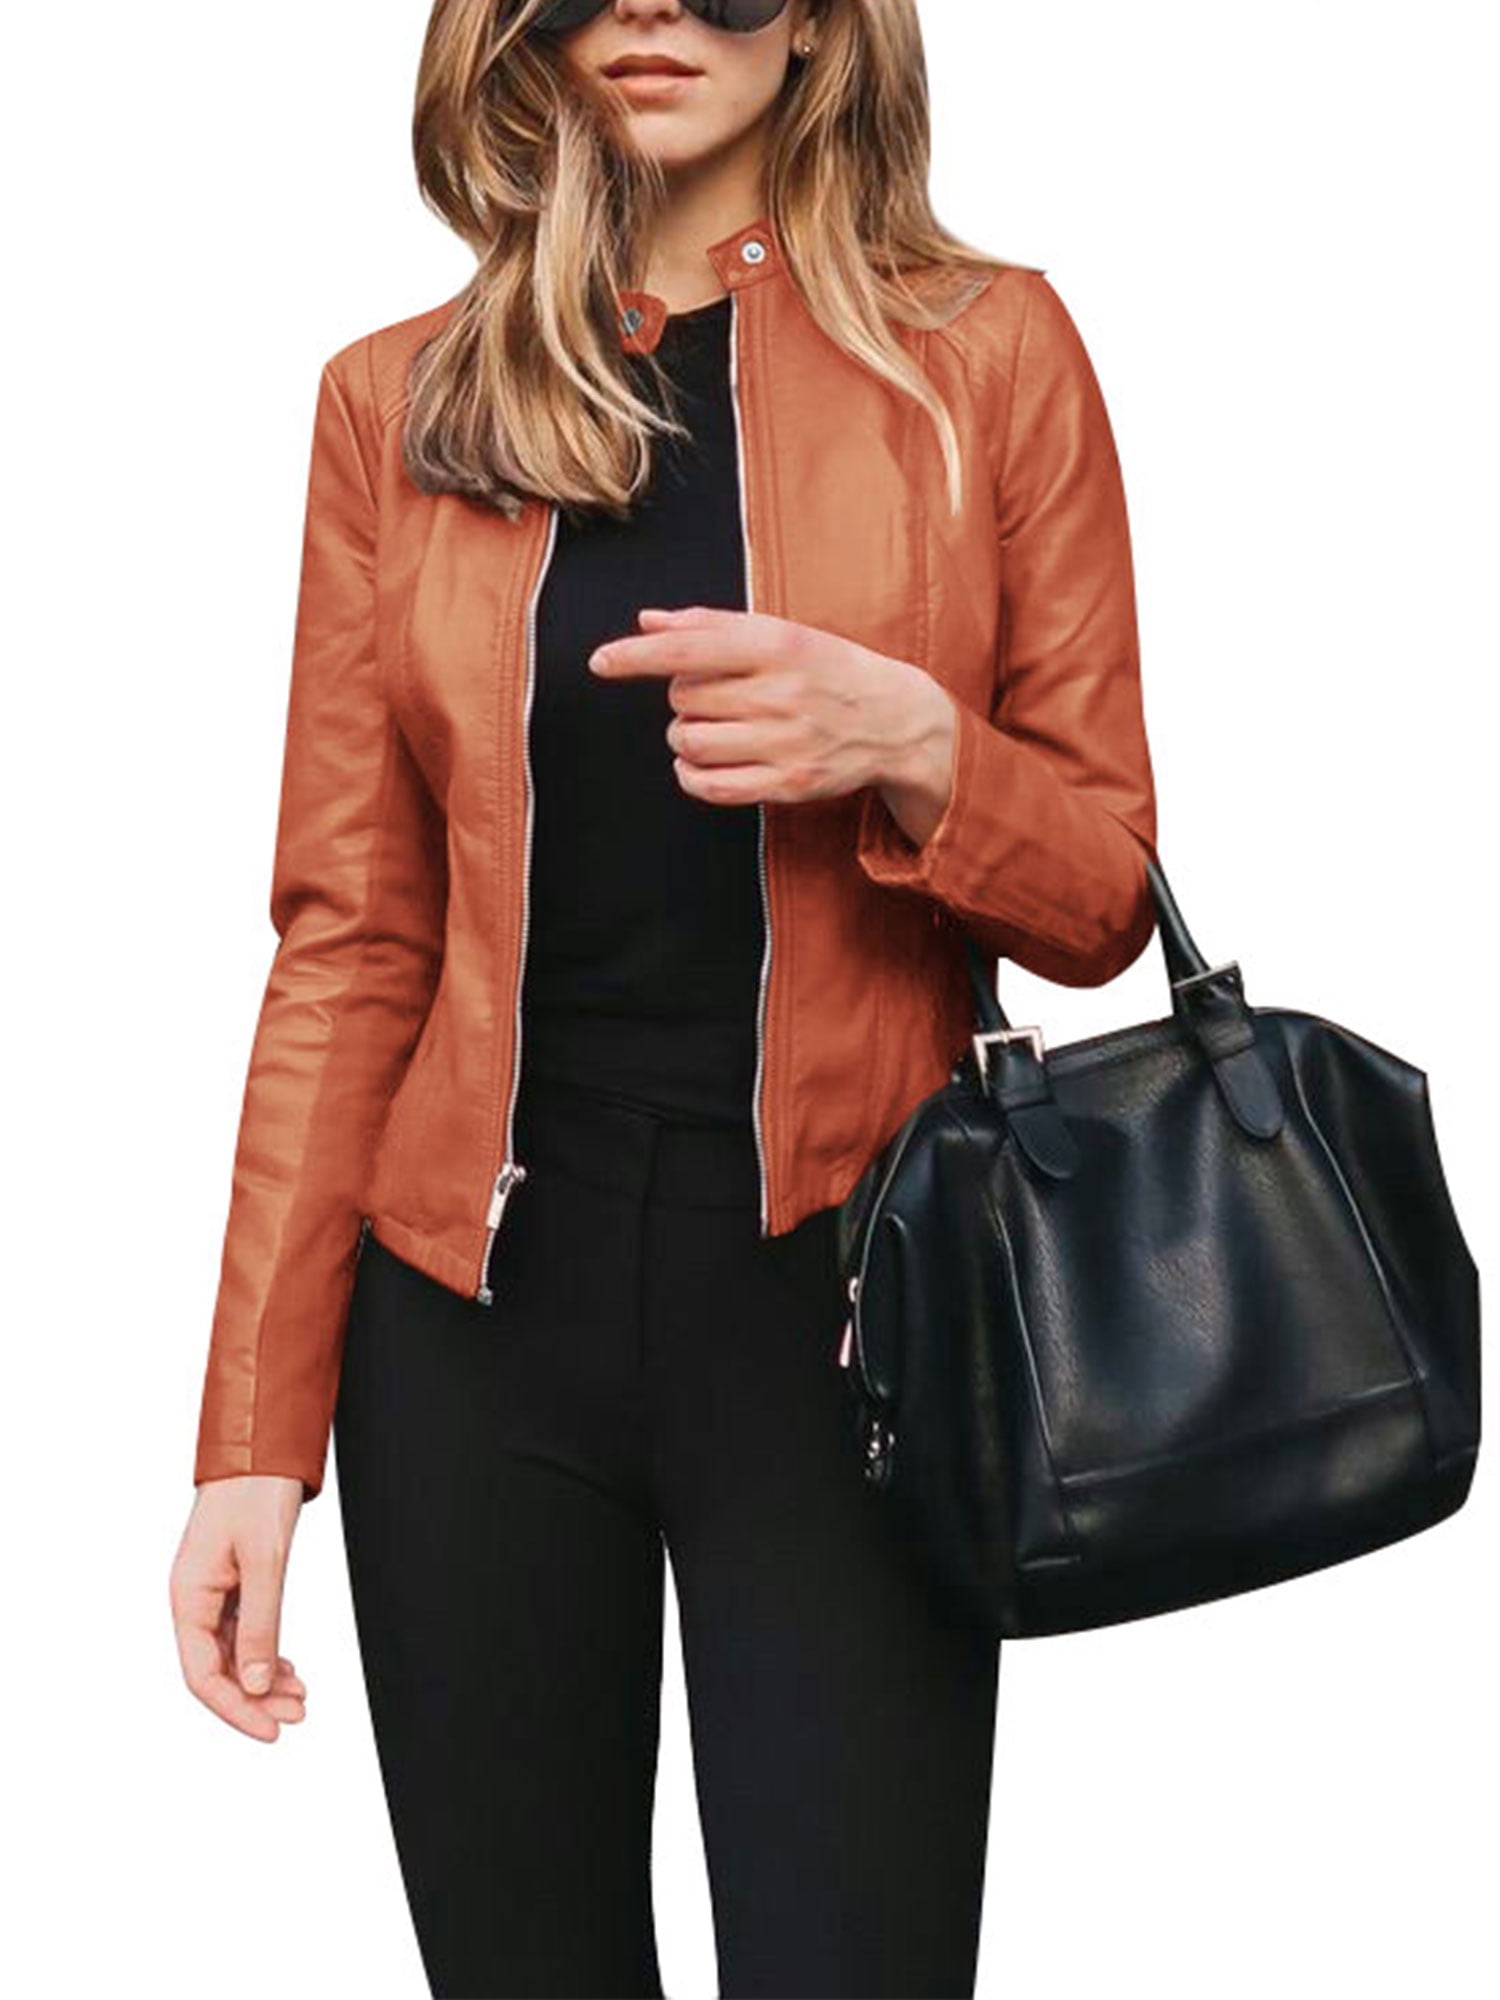 BESDAY Womens Faux Leather Short Moto Jacket Zip-up Slim Biker Coat with Pockets 